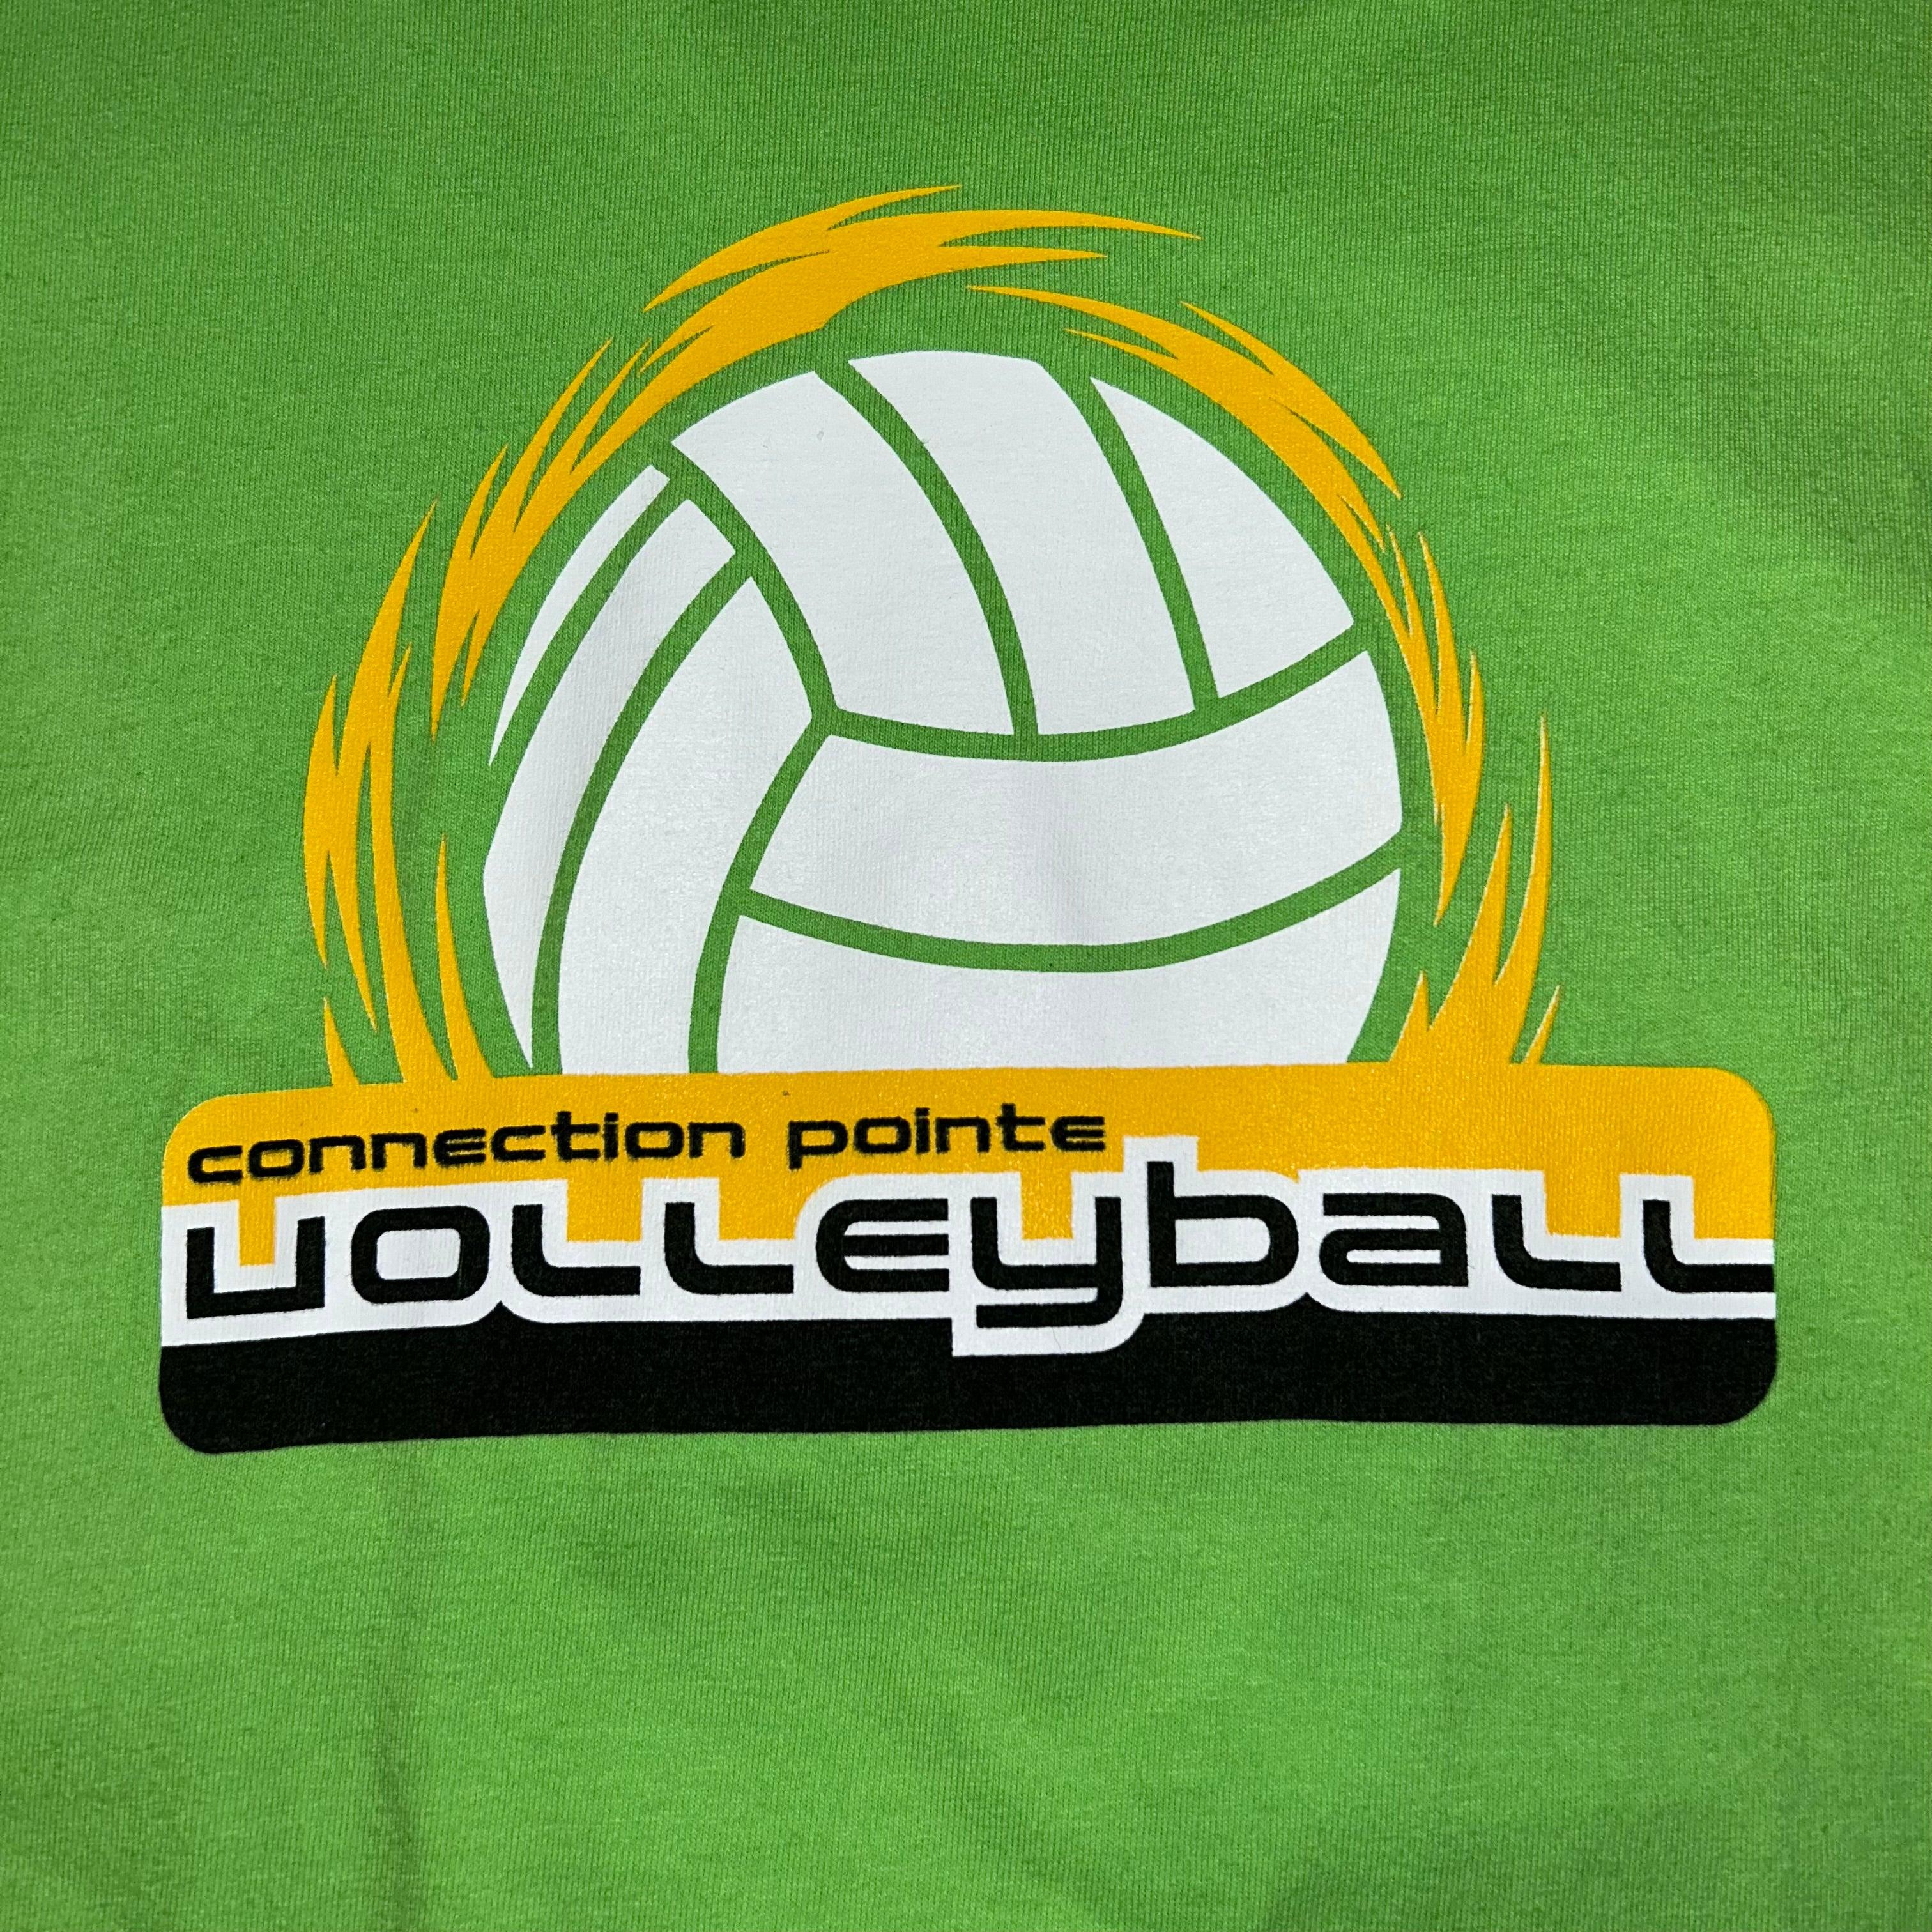 T-shirt Volleyball (L) - oldstyleclothing